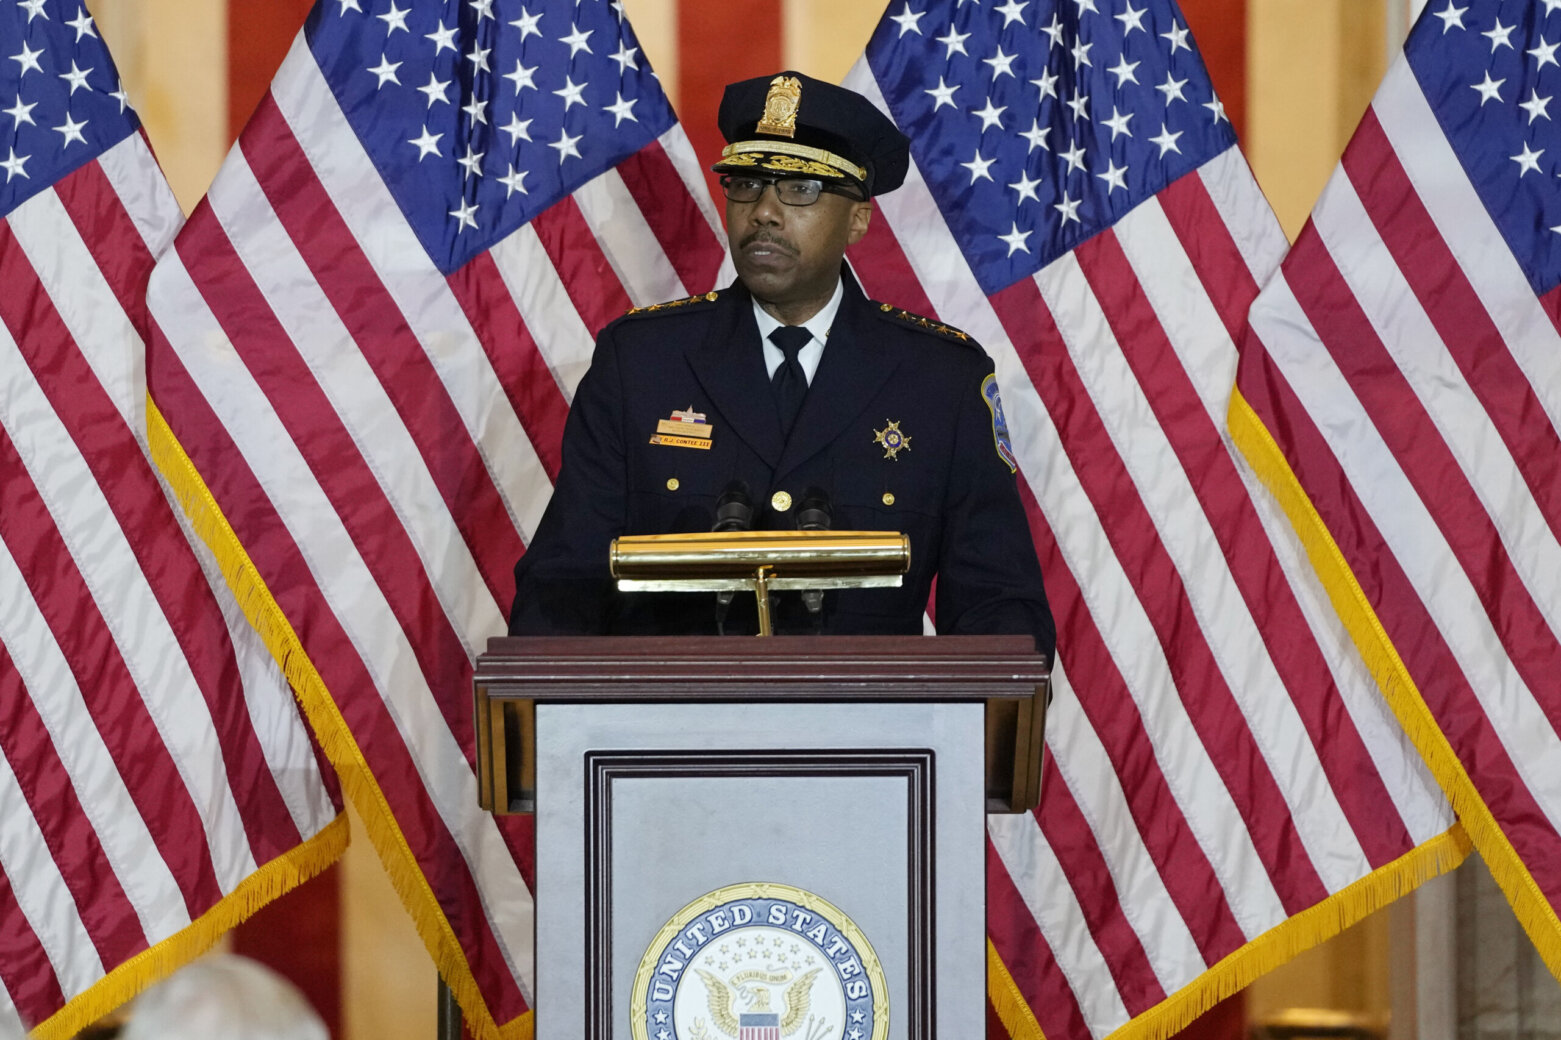 DC’s police chief says recruiting officers is harder due to new laws - WTOP News